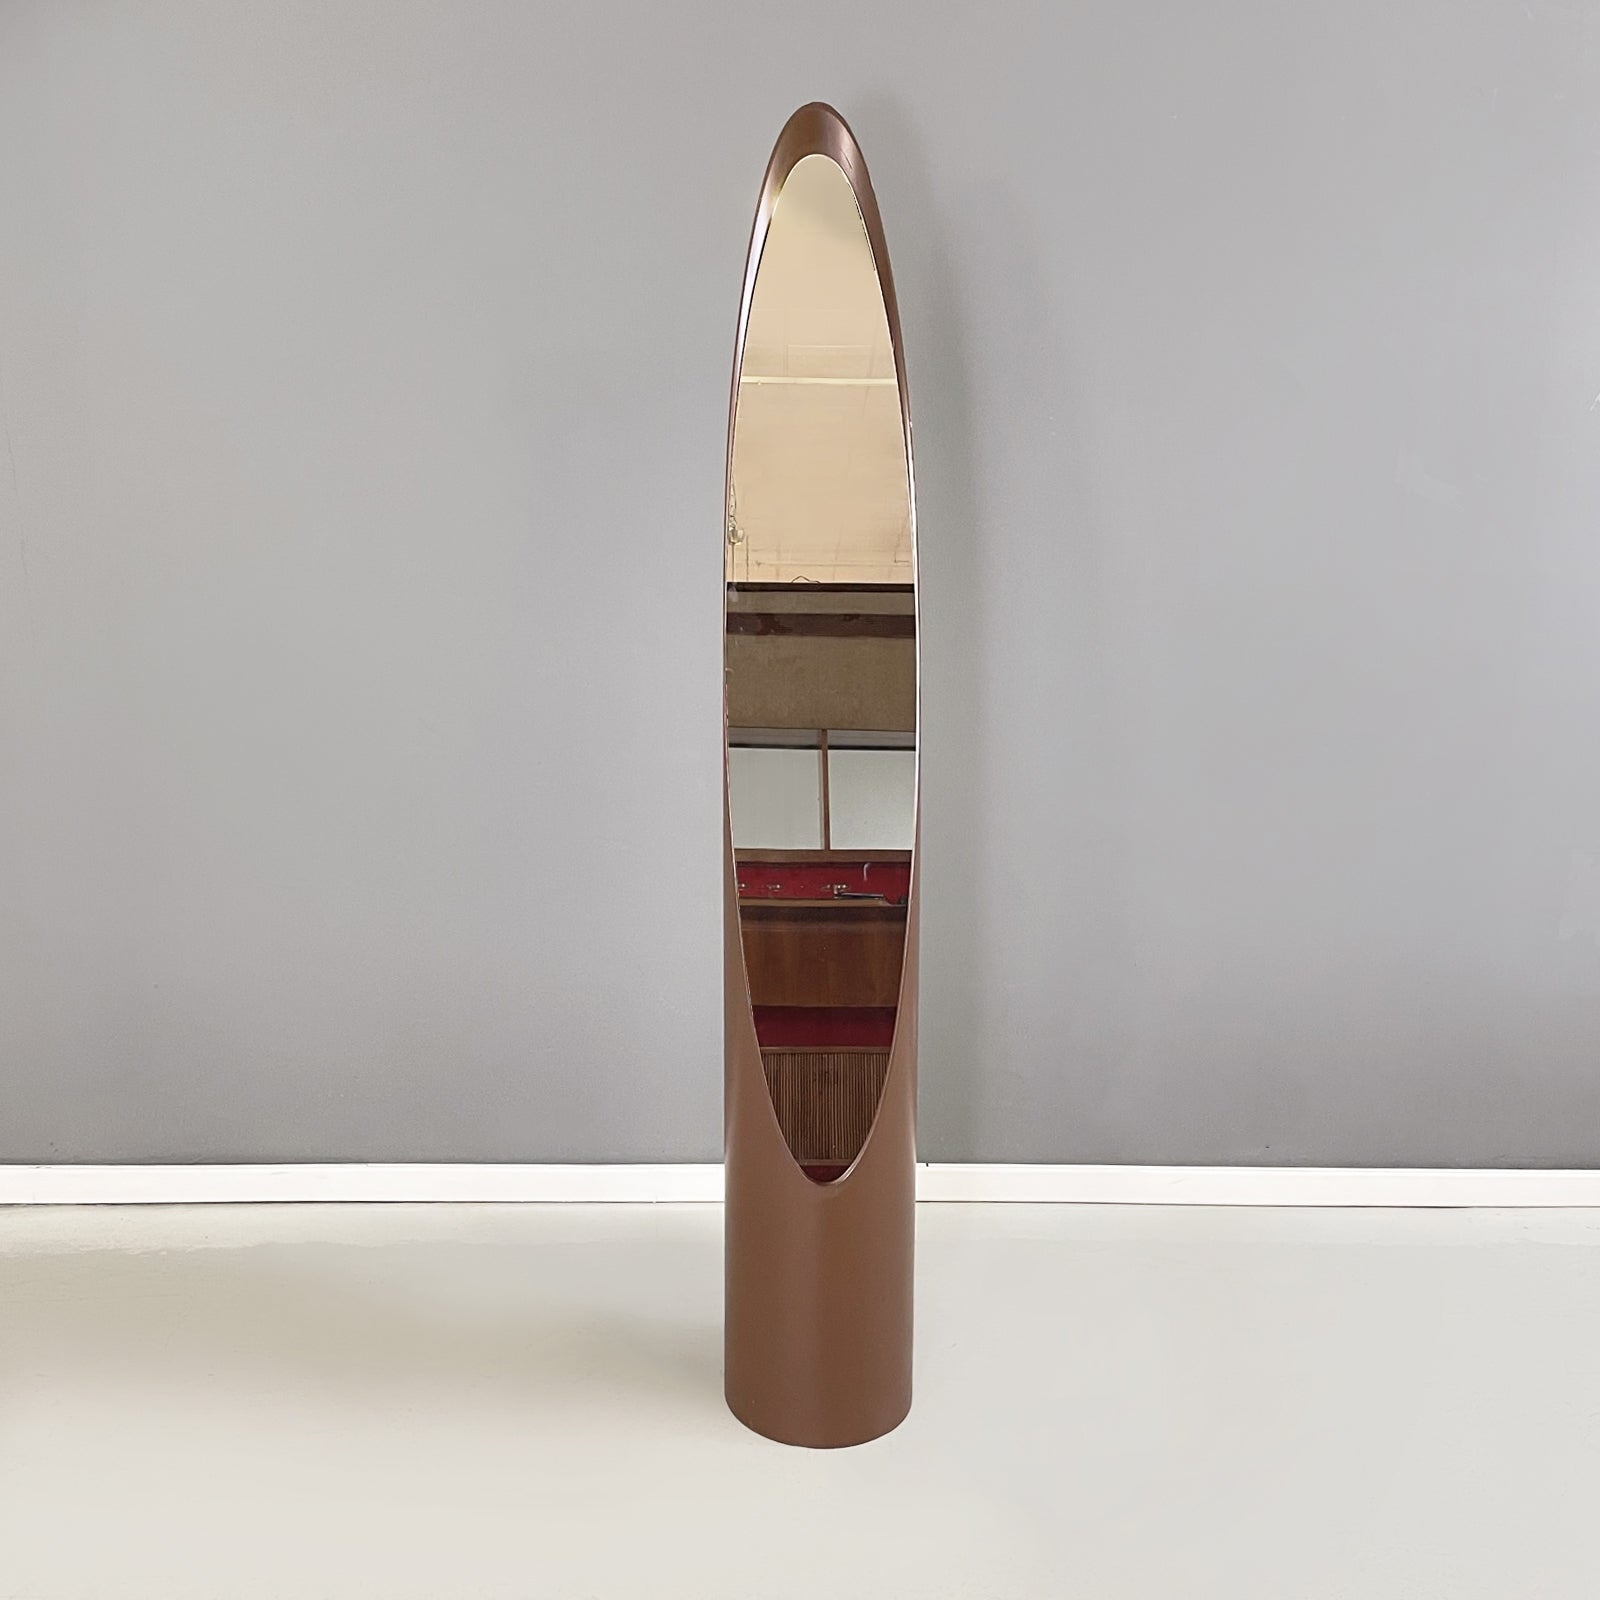 Italian space age Brown Floor mirror Unghia or Lipstick by Rodolfo Bonetto 1970s
Self-supporting floor mirror mod. Unghia, also known as Lipstick, with a round base with ABS plastic structure in dark brown. The elliptical mirror is slightly inclined